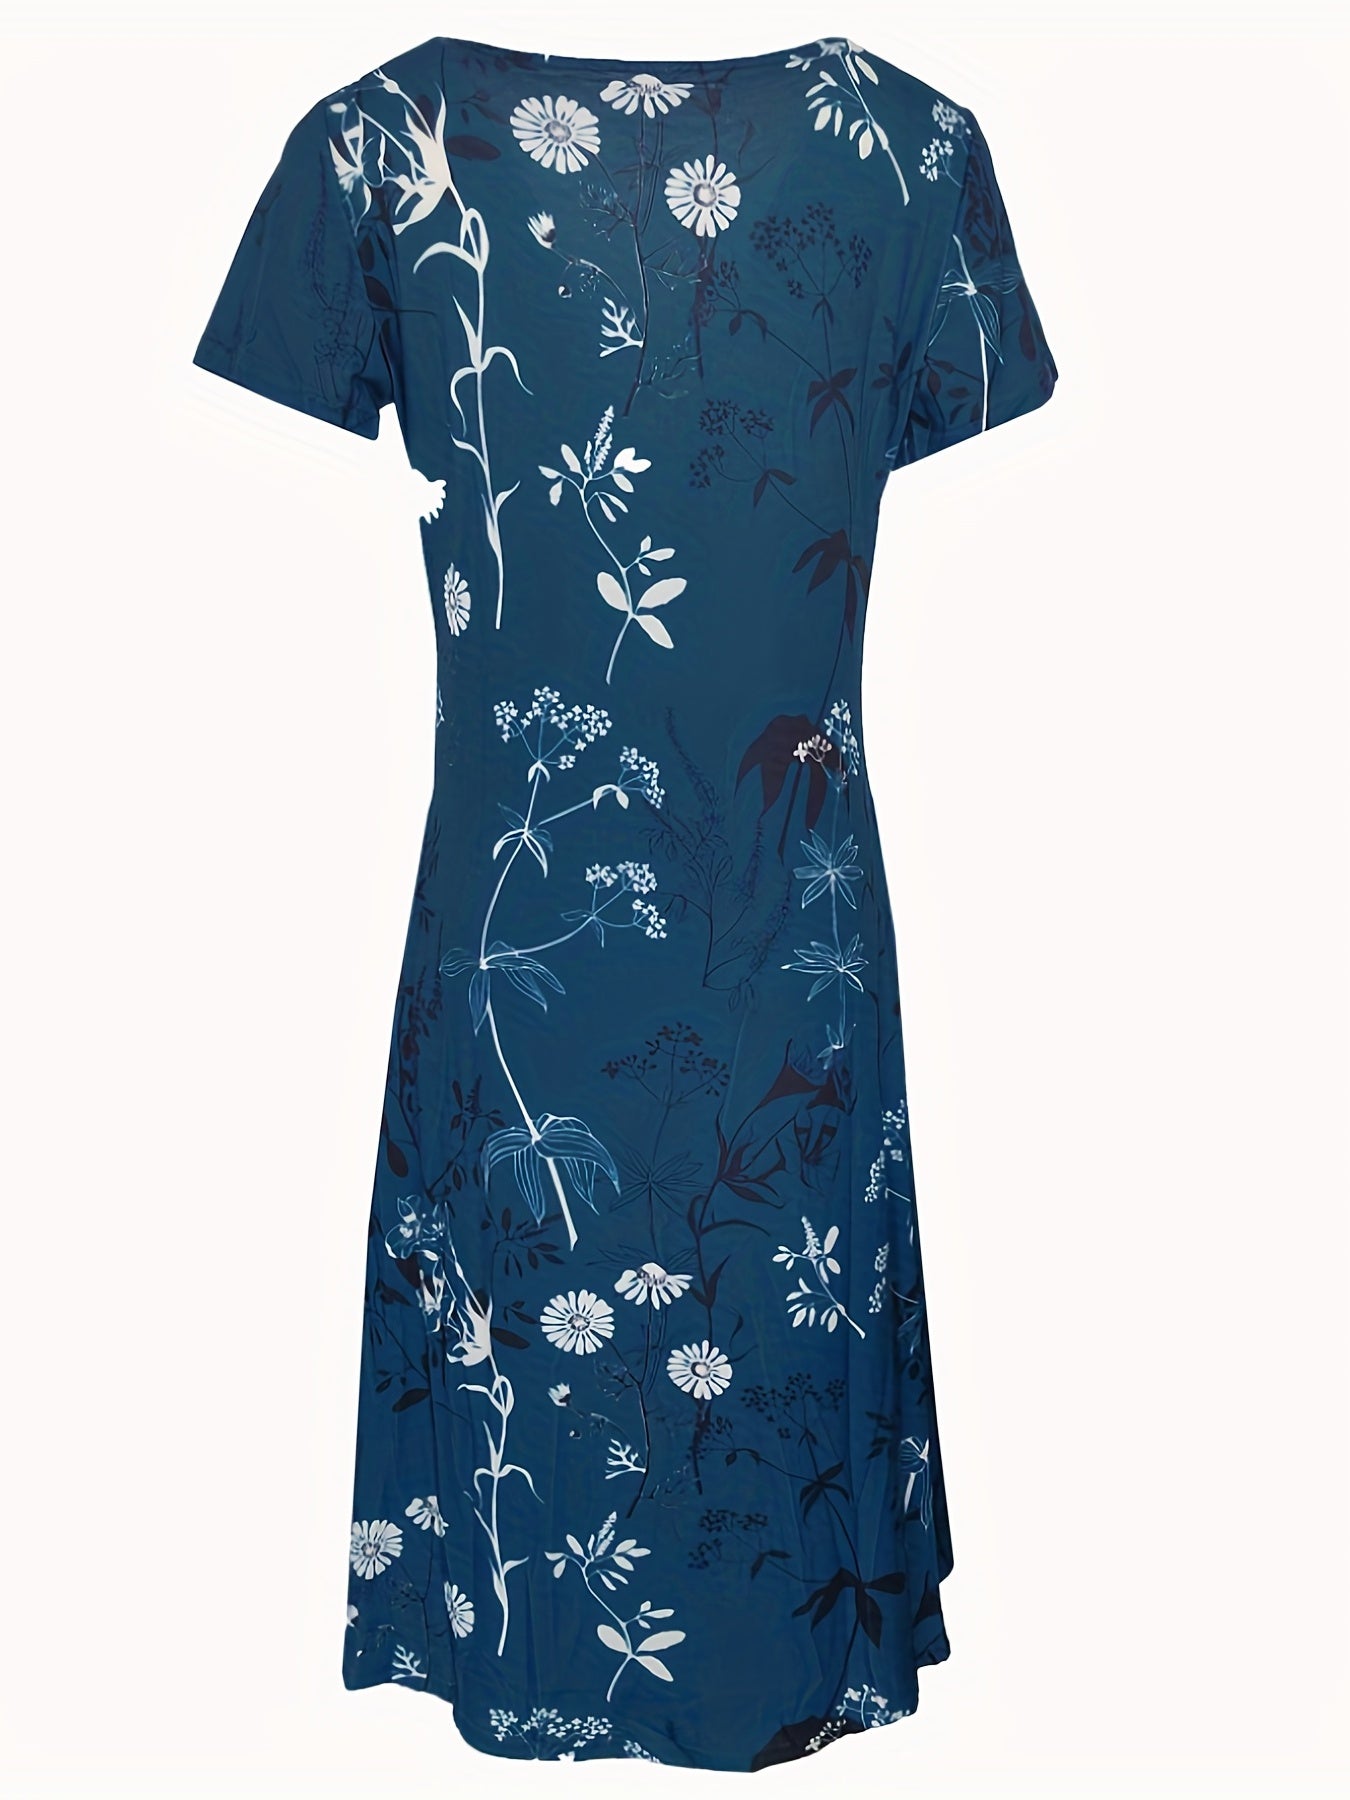 Vzyzv Floral Print Dual Pockets Dress, Casual Short Sleeve Dress For Spring & Summer, Women's Clothing